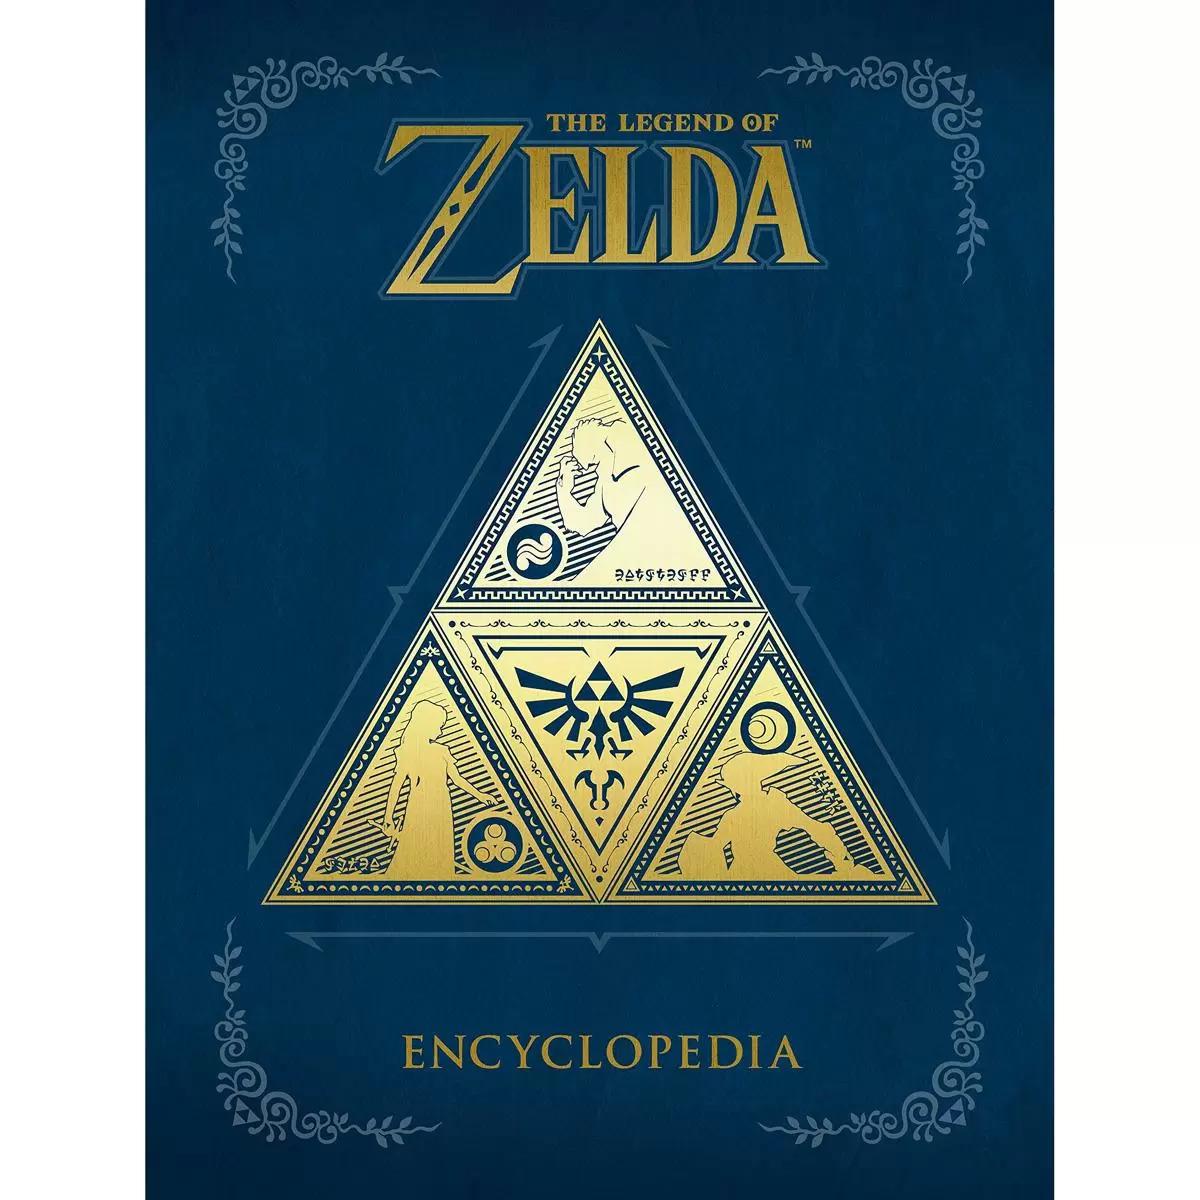 The Legend of Zelda Encyclopedia Book for $20.66 Shipped